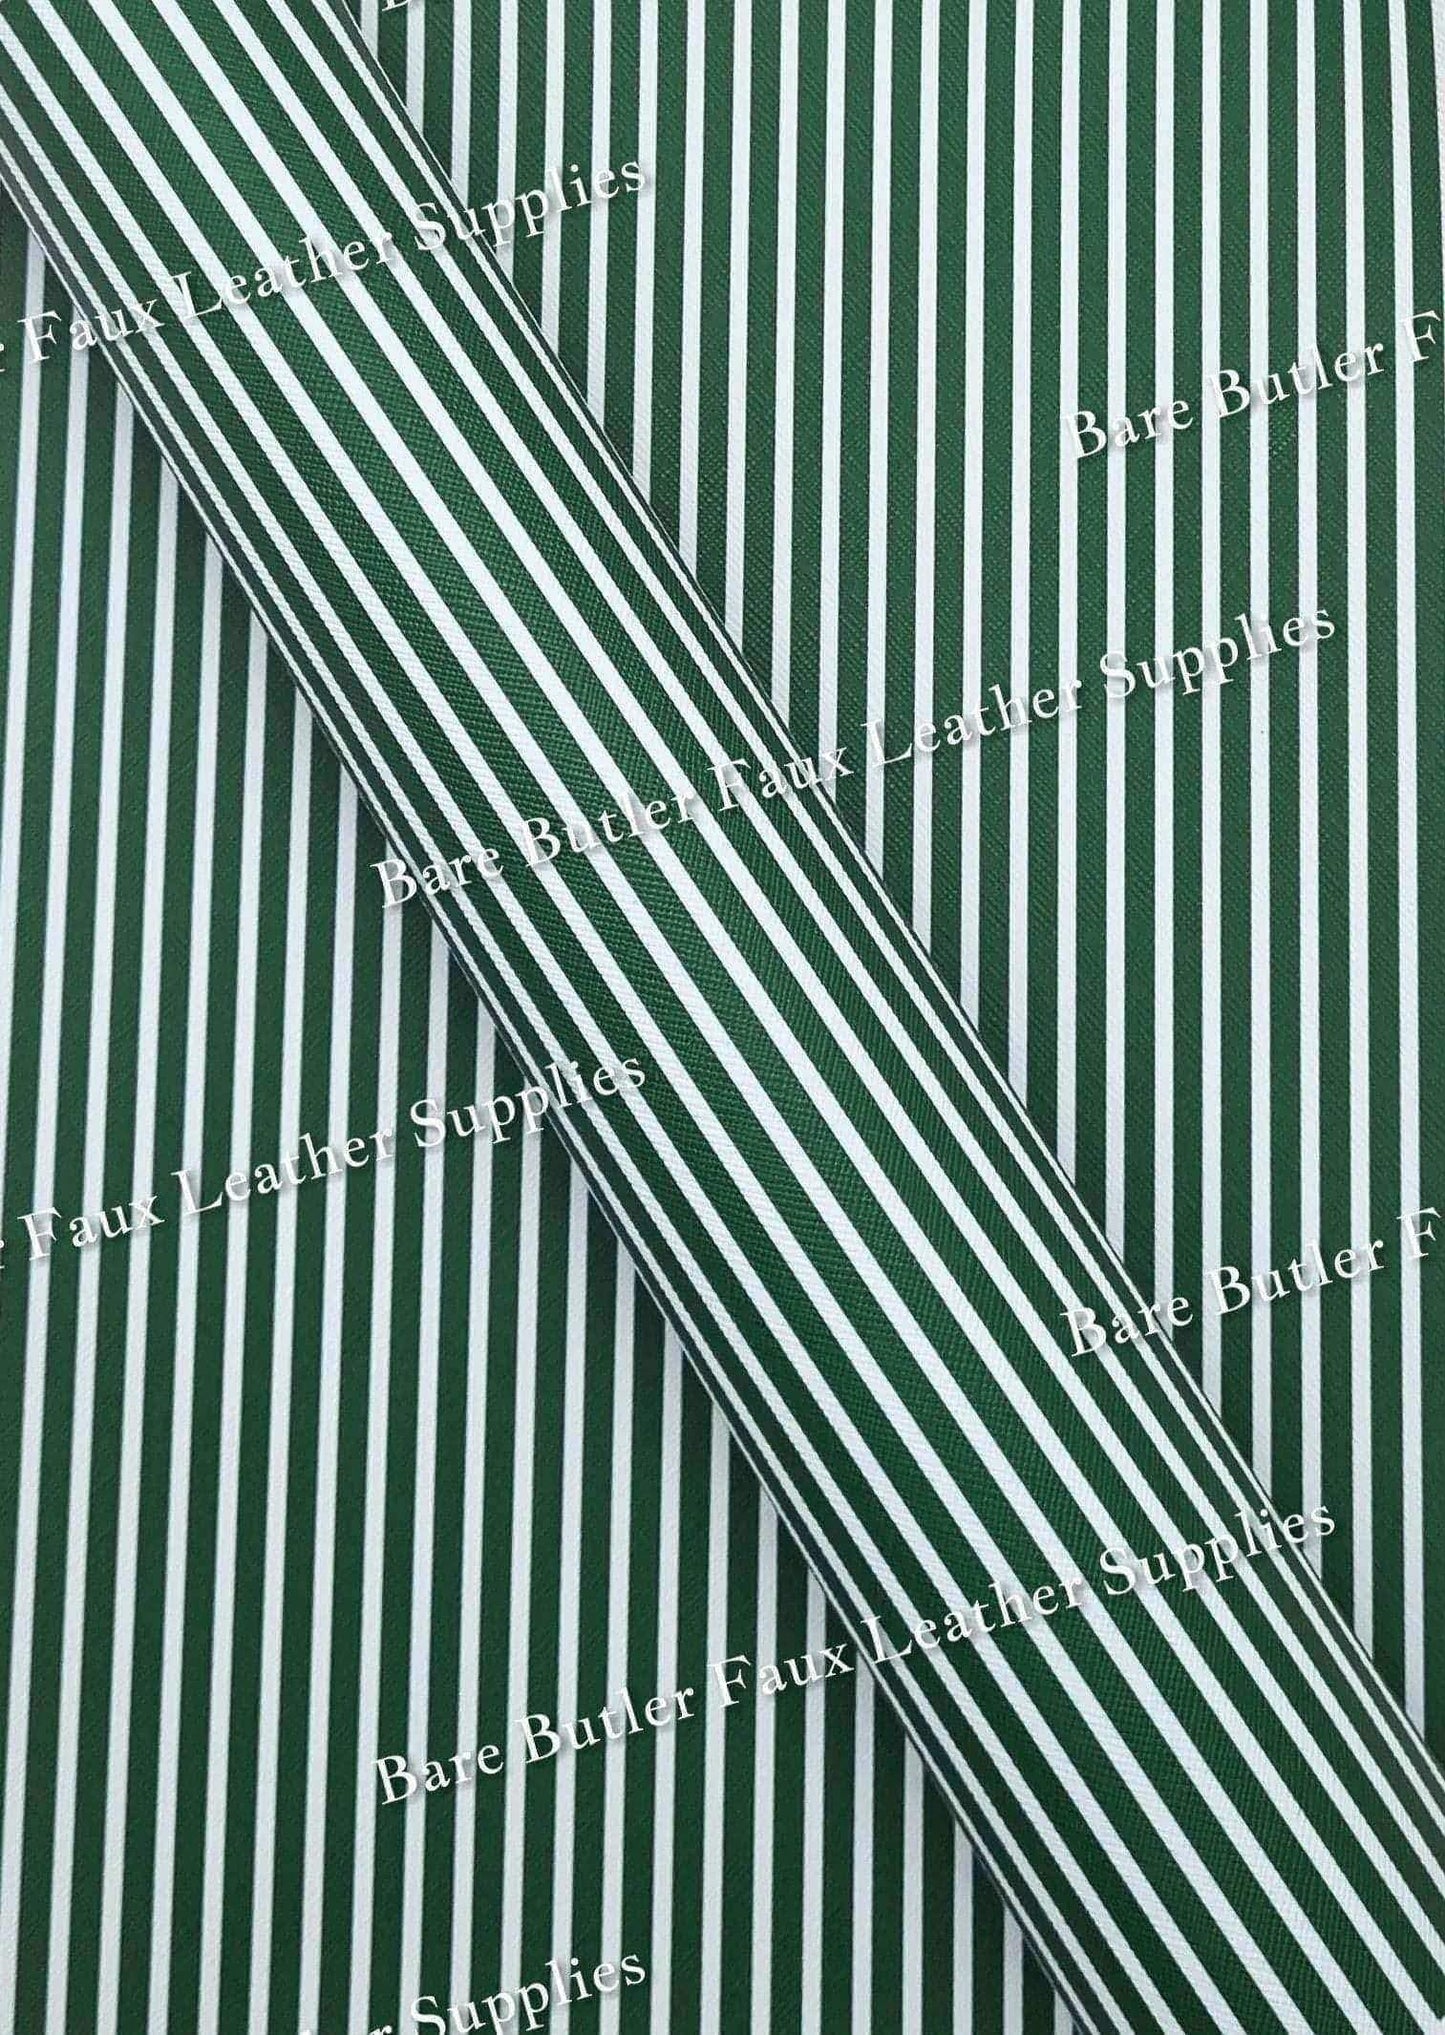 Green & White Christmas Stripe Faux Leather - Faux, Faux Leather, green, Leather, leatherette, Litchi, Stripe - Bare Butler Faux Leather Supplies 